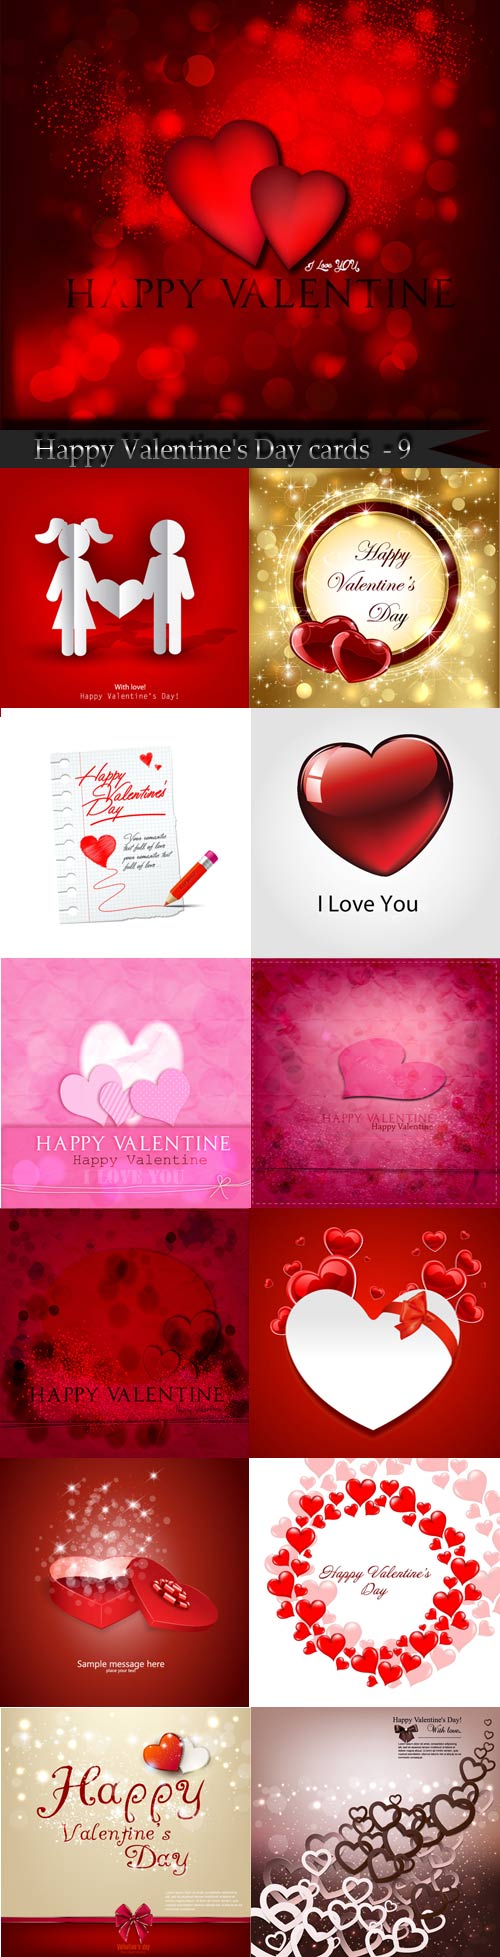 Happy Valentine's Day cards and backgrounds - 9